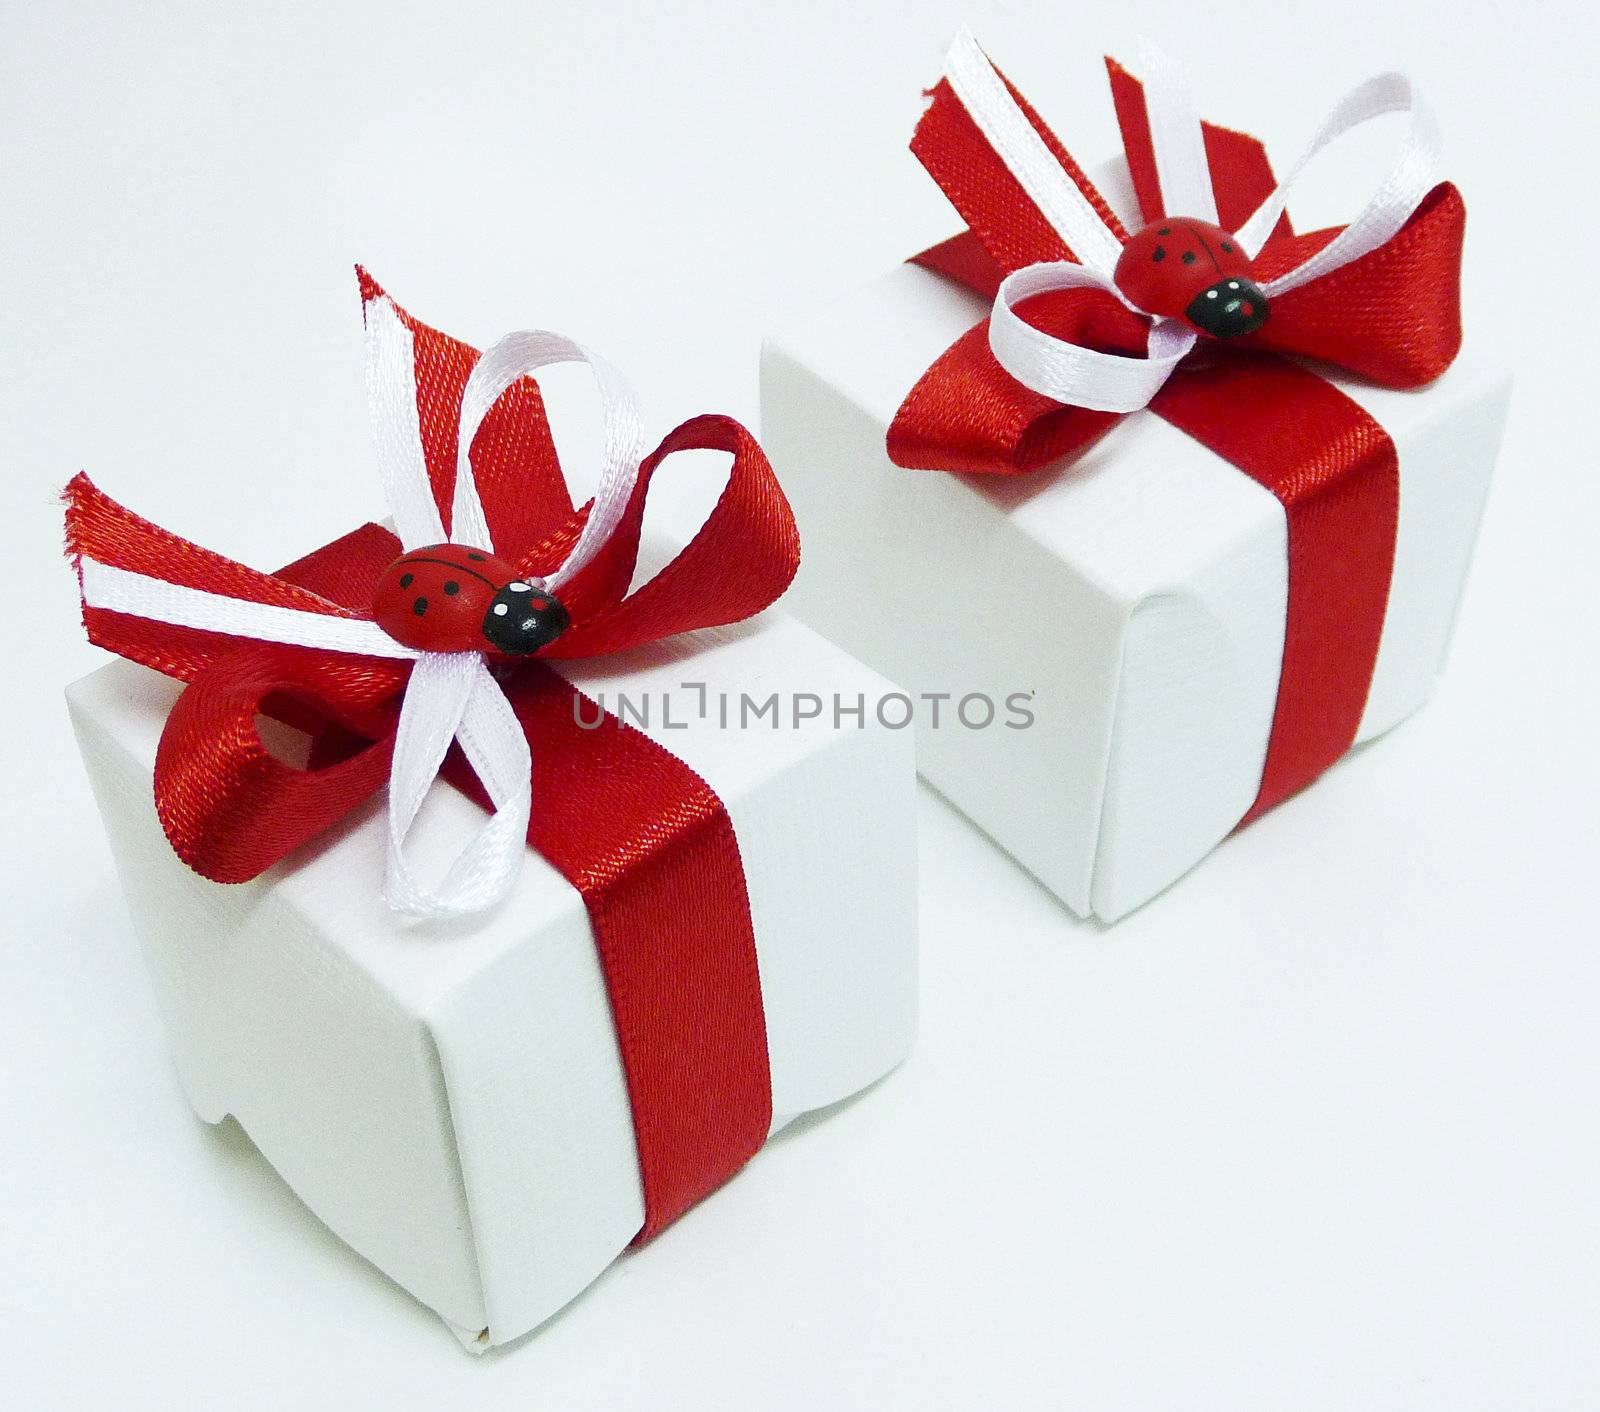 White gift boxes with red ribbons and ladybugs